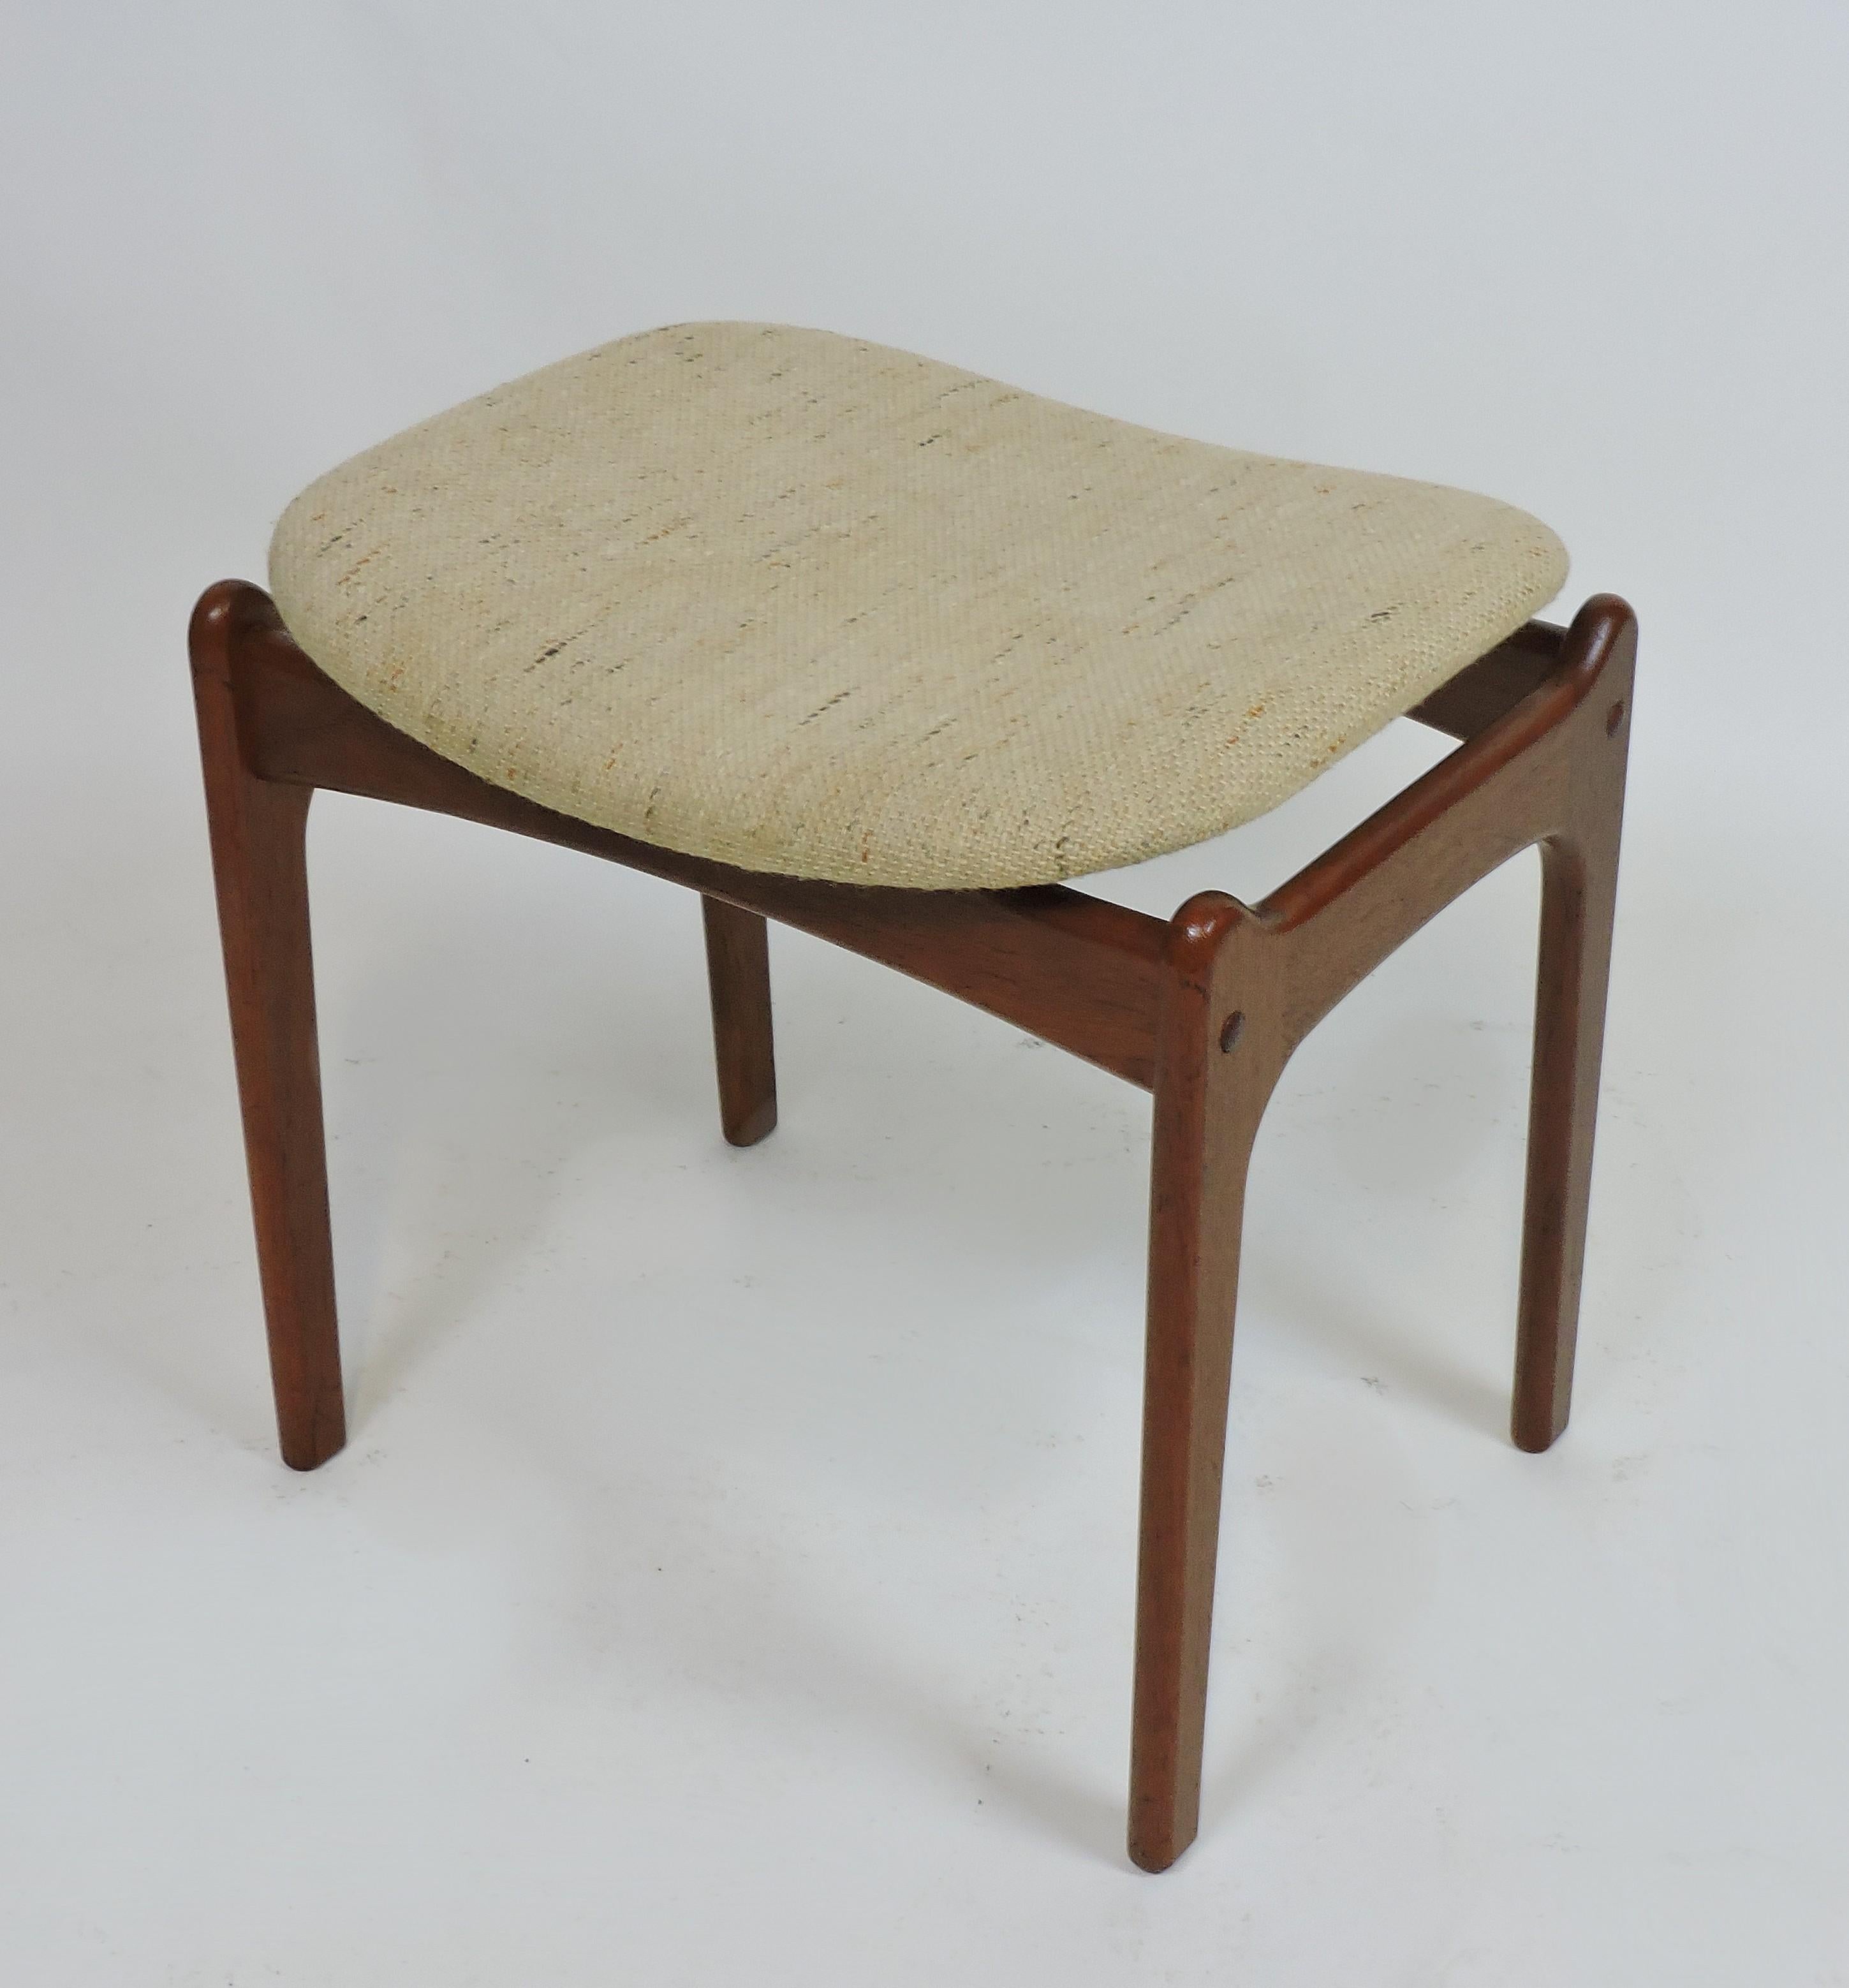 Sleek Danish modern footstool designed by Erik Buck and made in Denmark by OD Møbler. This stool is made of solid sculpted teak and has a curved seat covered in the original fabric.